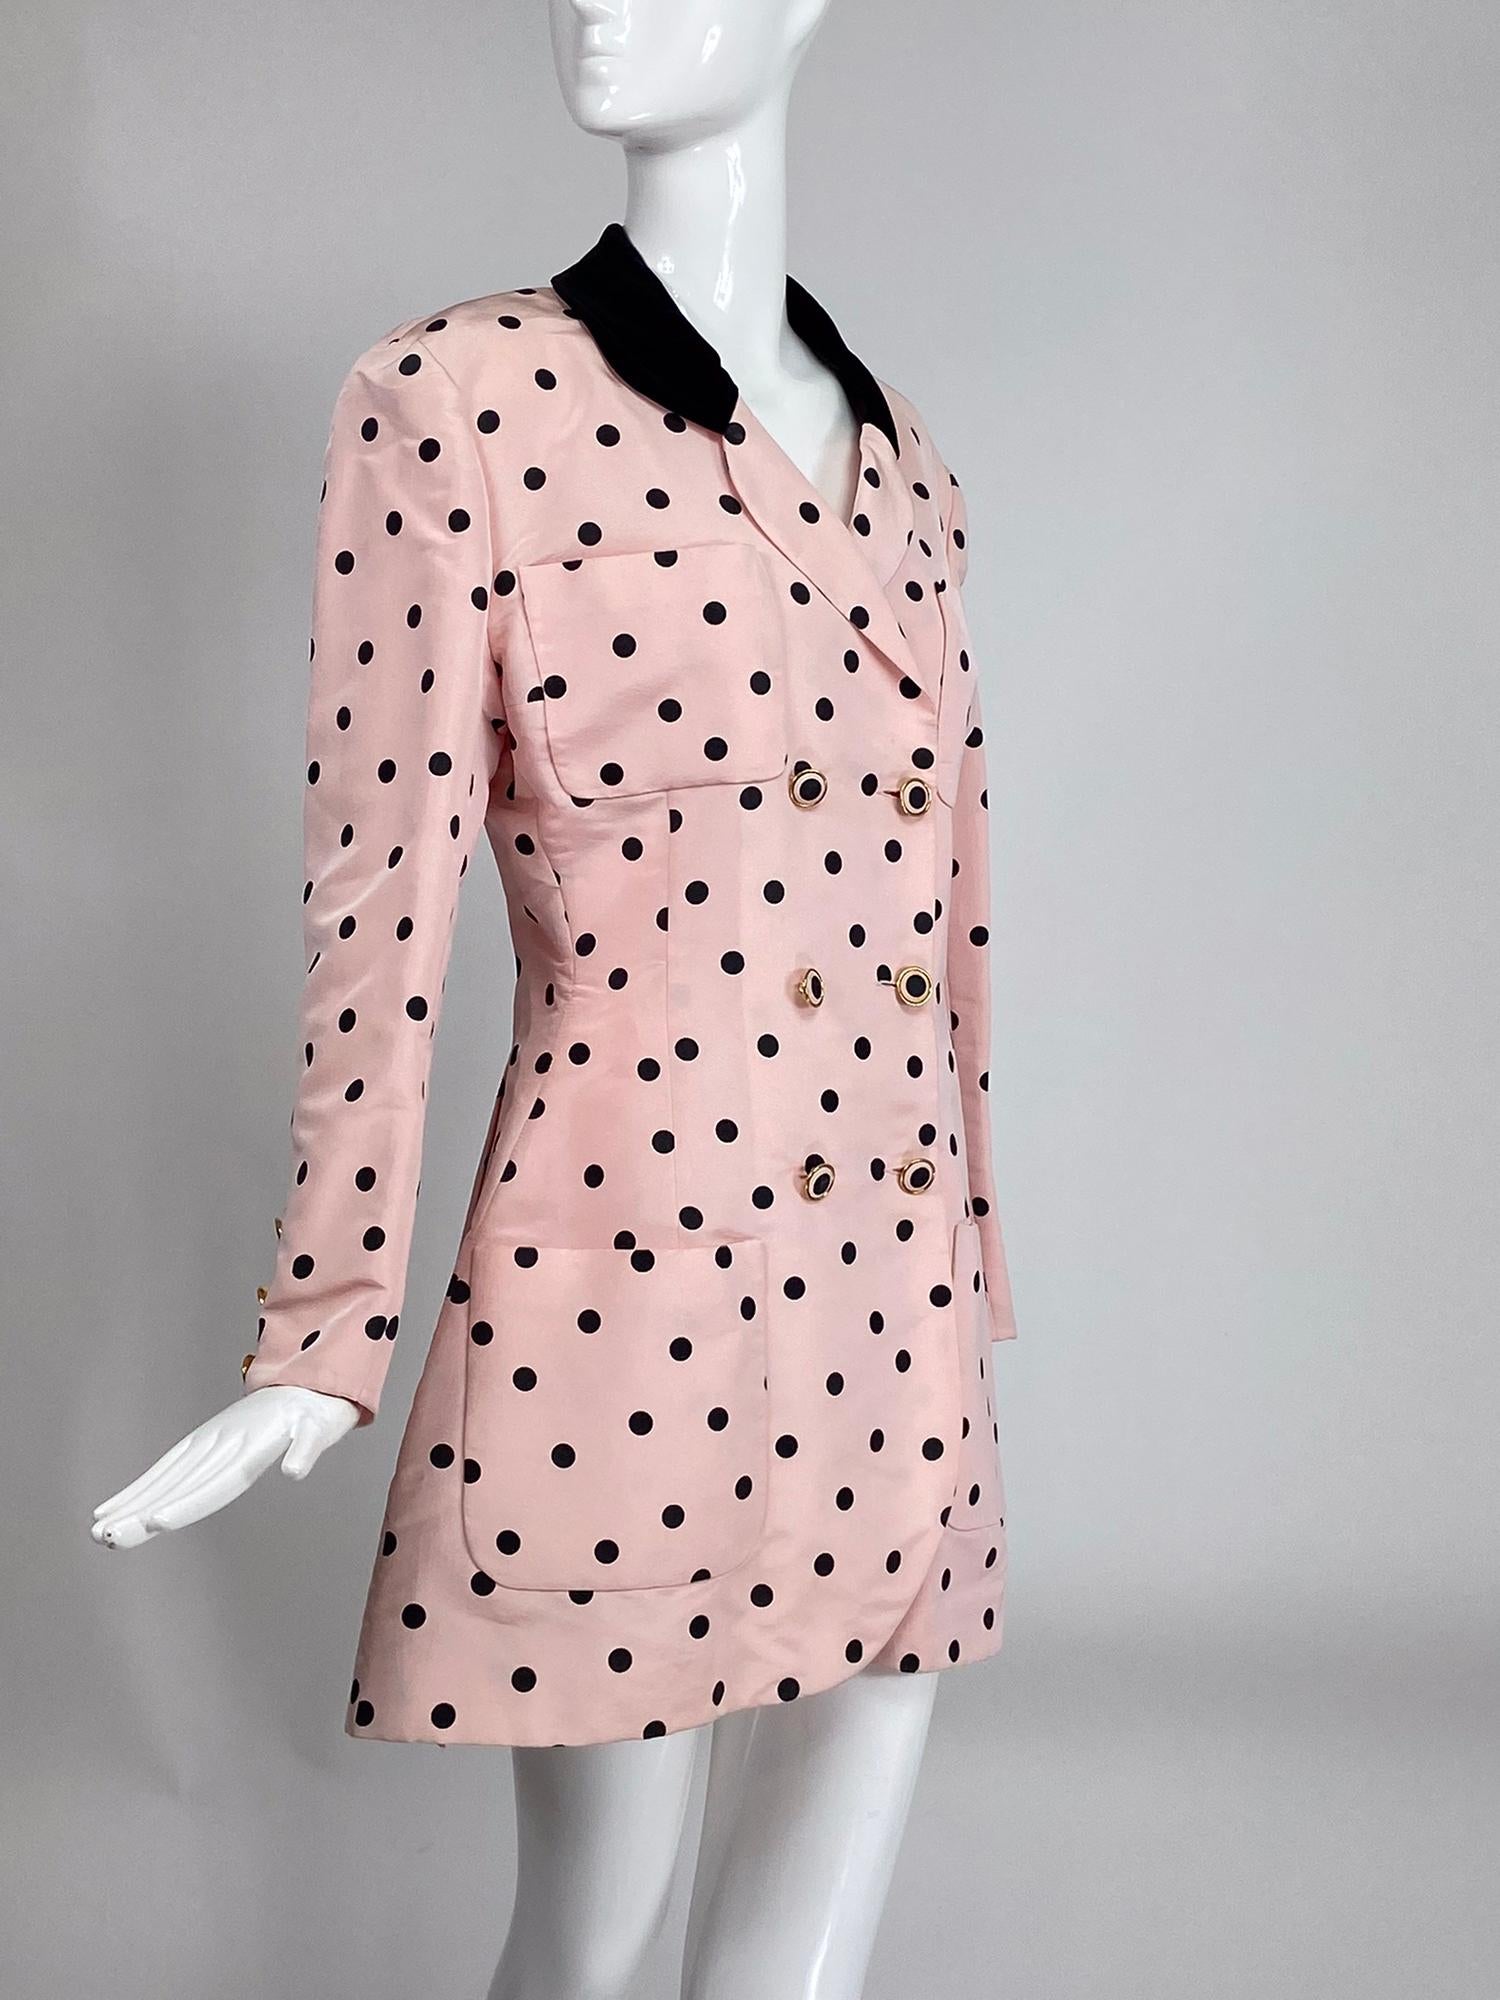 Chanel fitted silk faille pink & black dot jacket from the 1990s. Double breasted jacket is fitted through the waist and flairs at the hem. The jacket has a black velvet collar and has two open breast pockets and two open hip pockets. Long sleeves